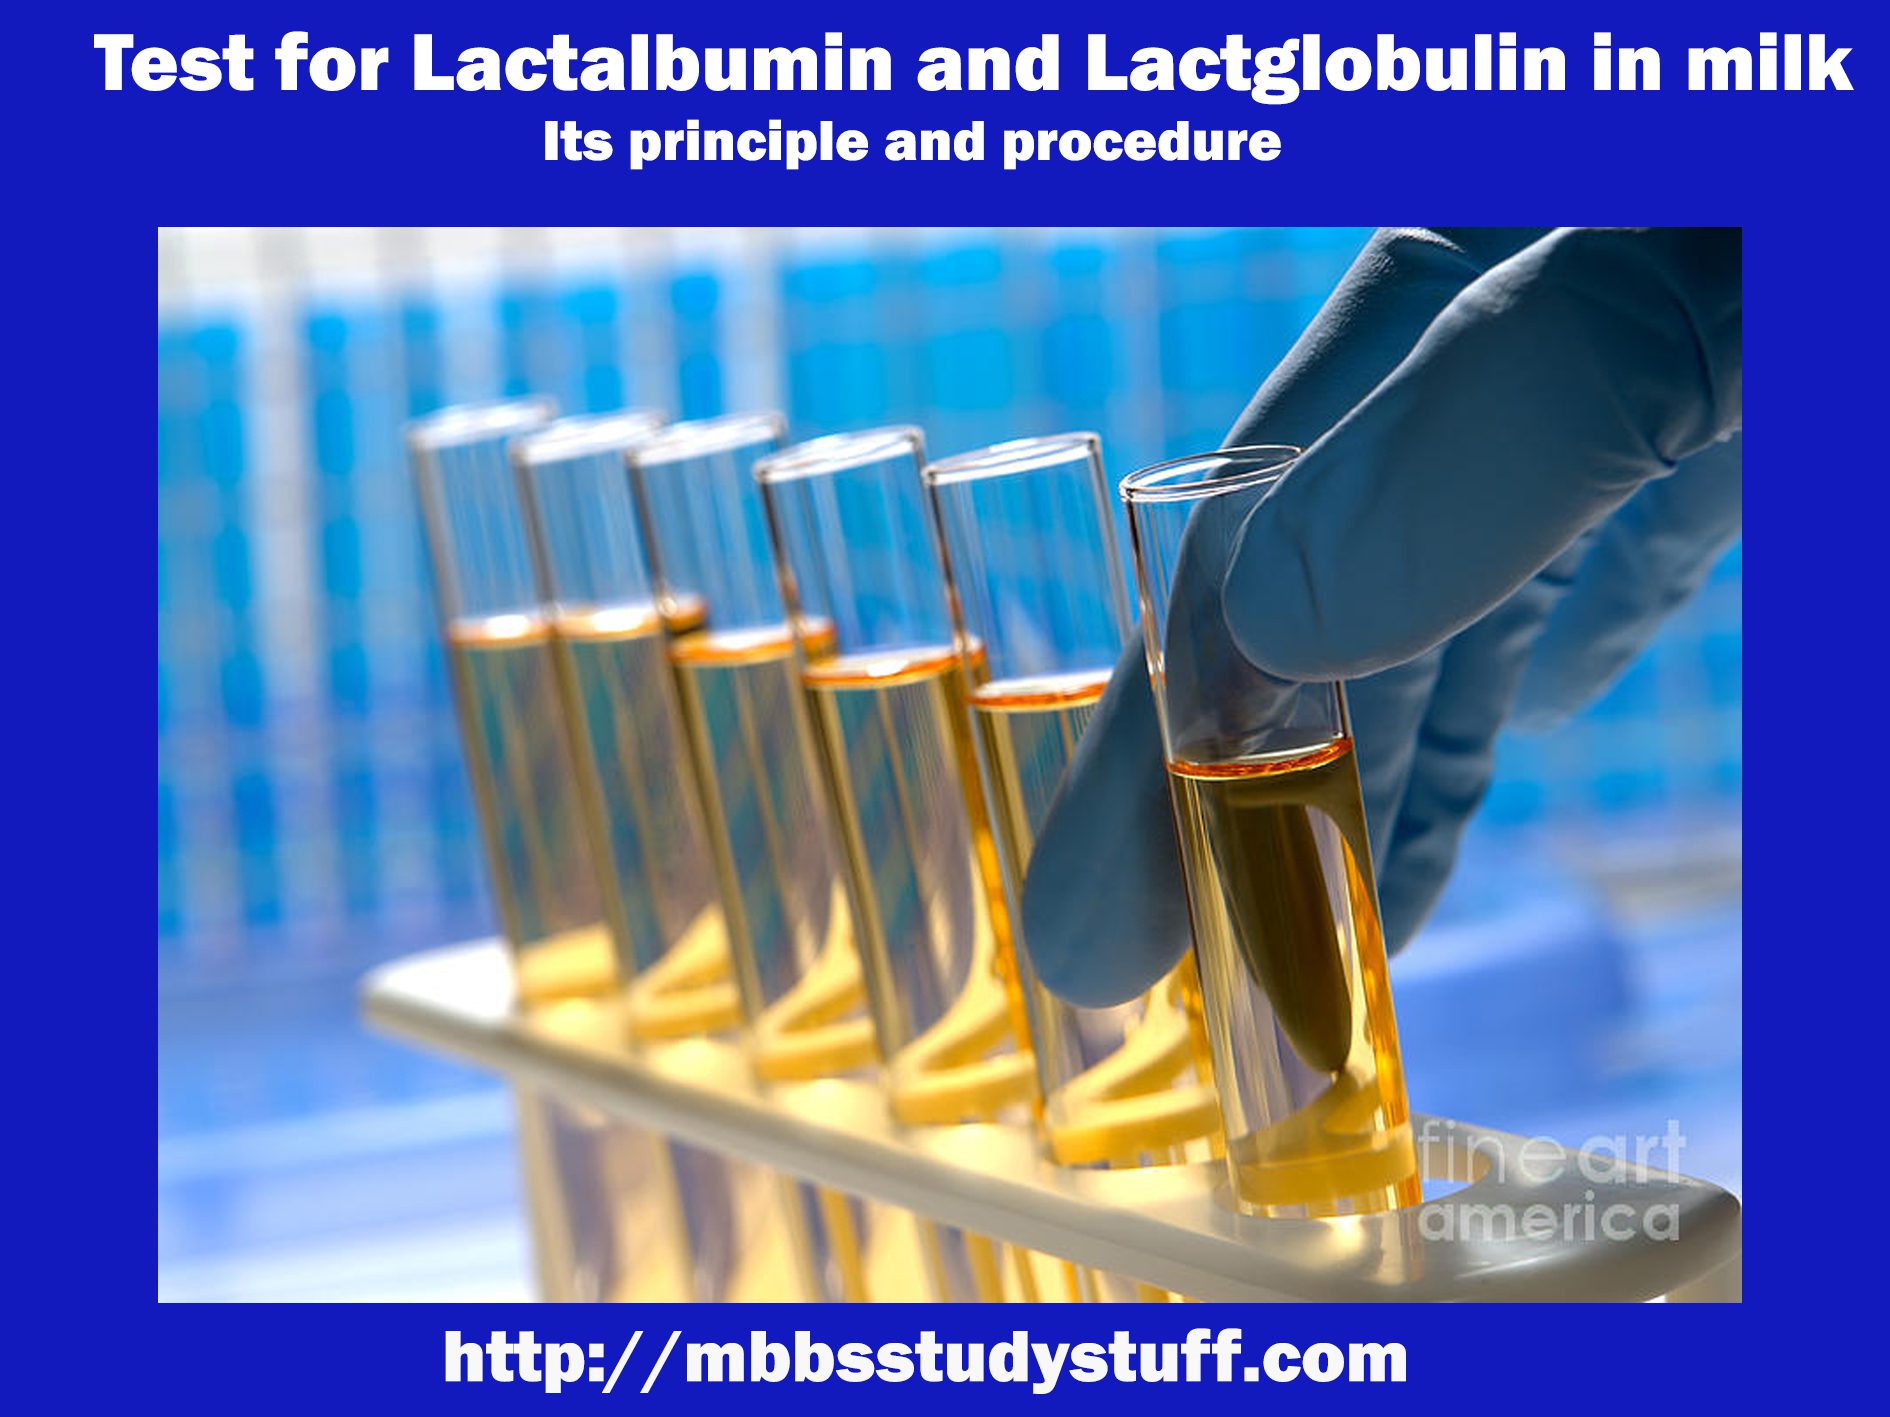 Test for Lactalbumin and Lactoglobulin in milk - Its principle and procedure